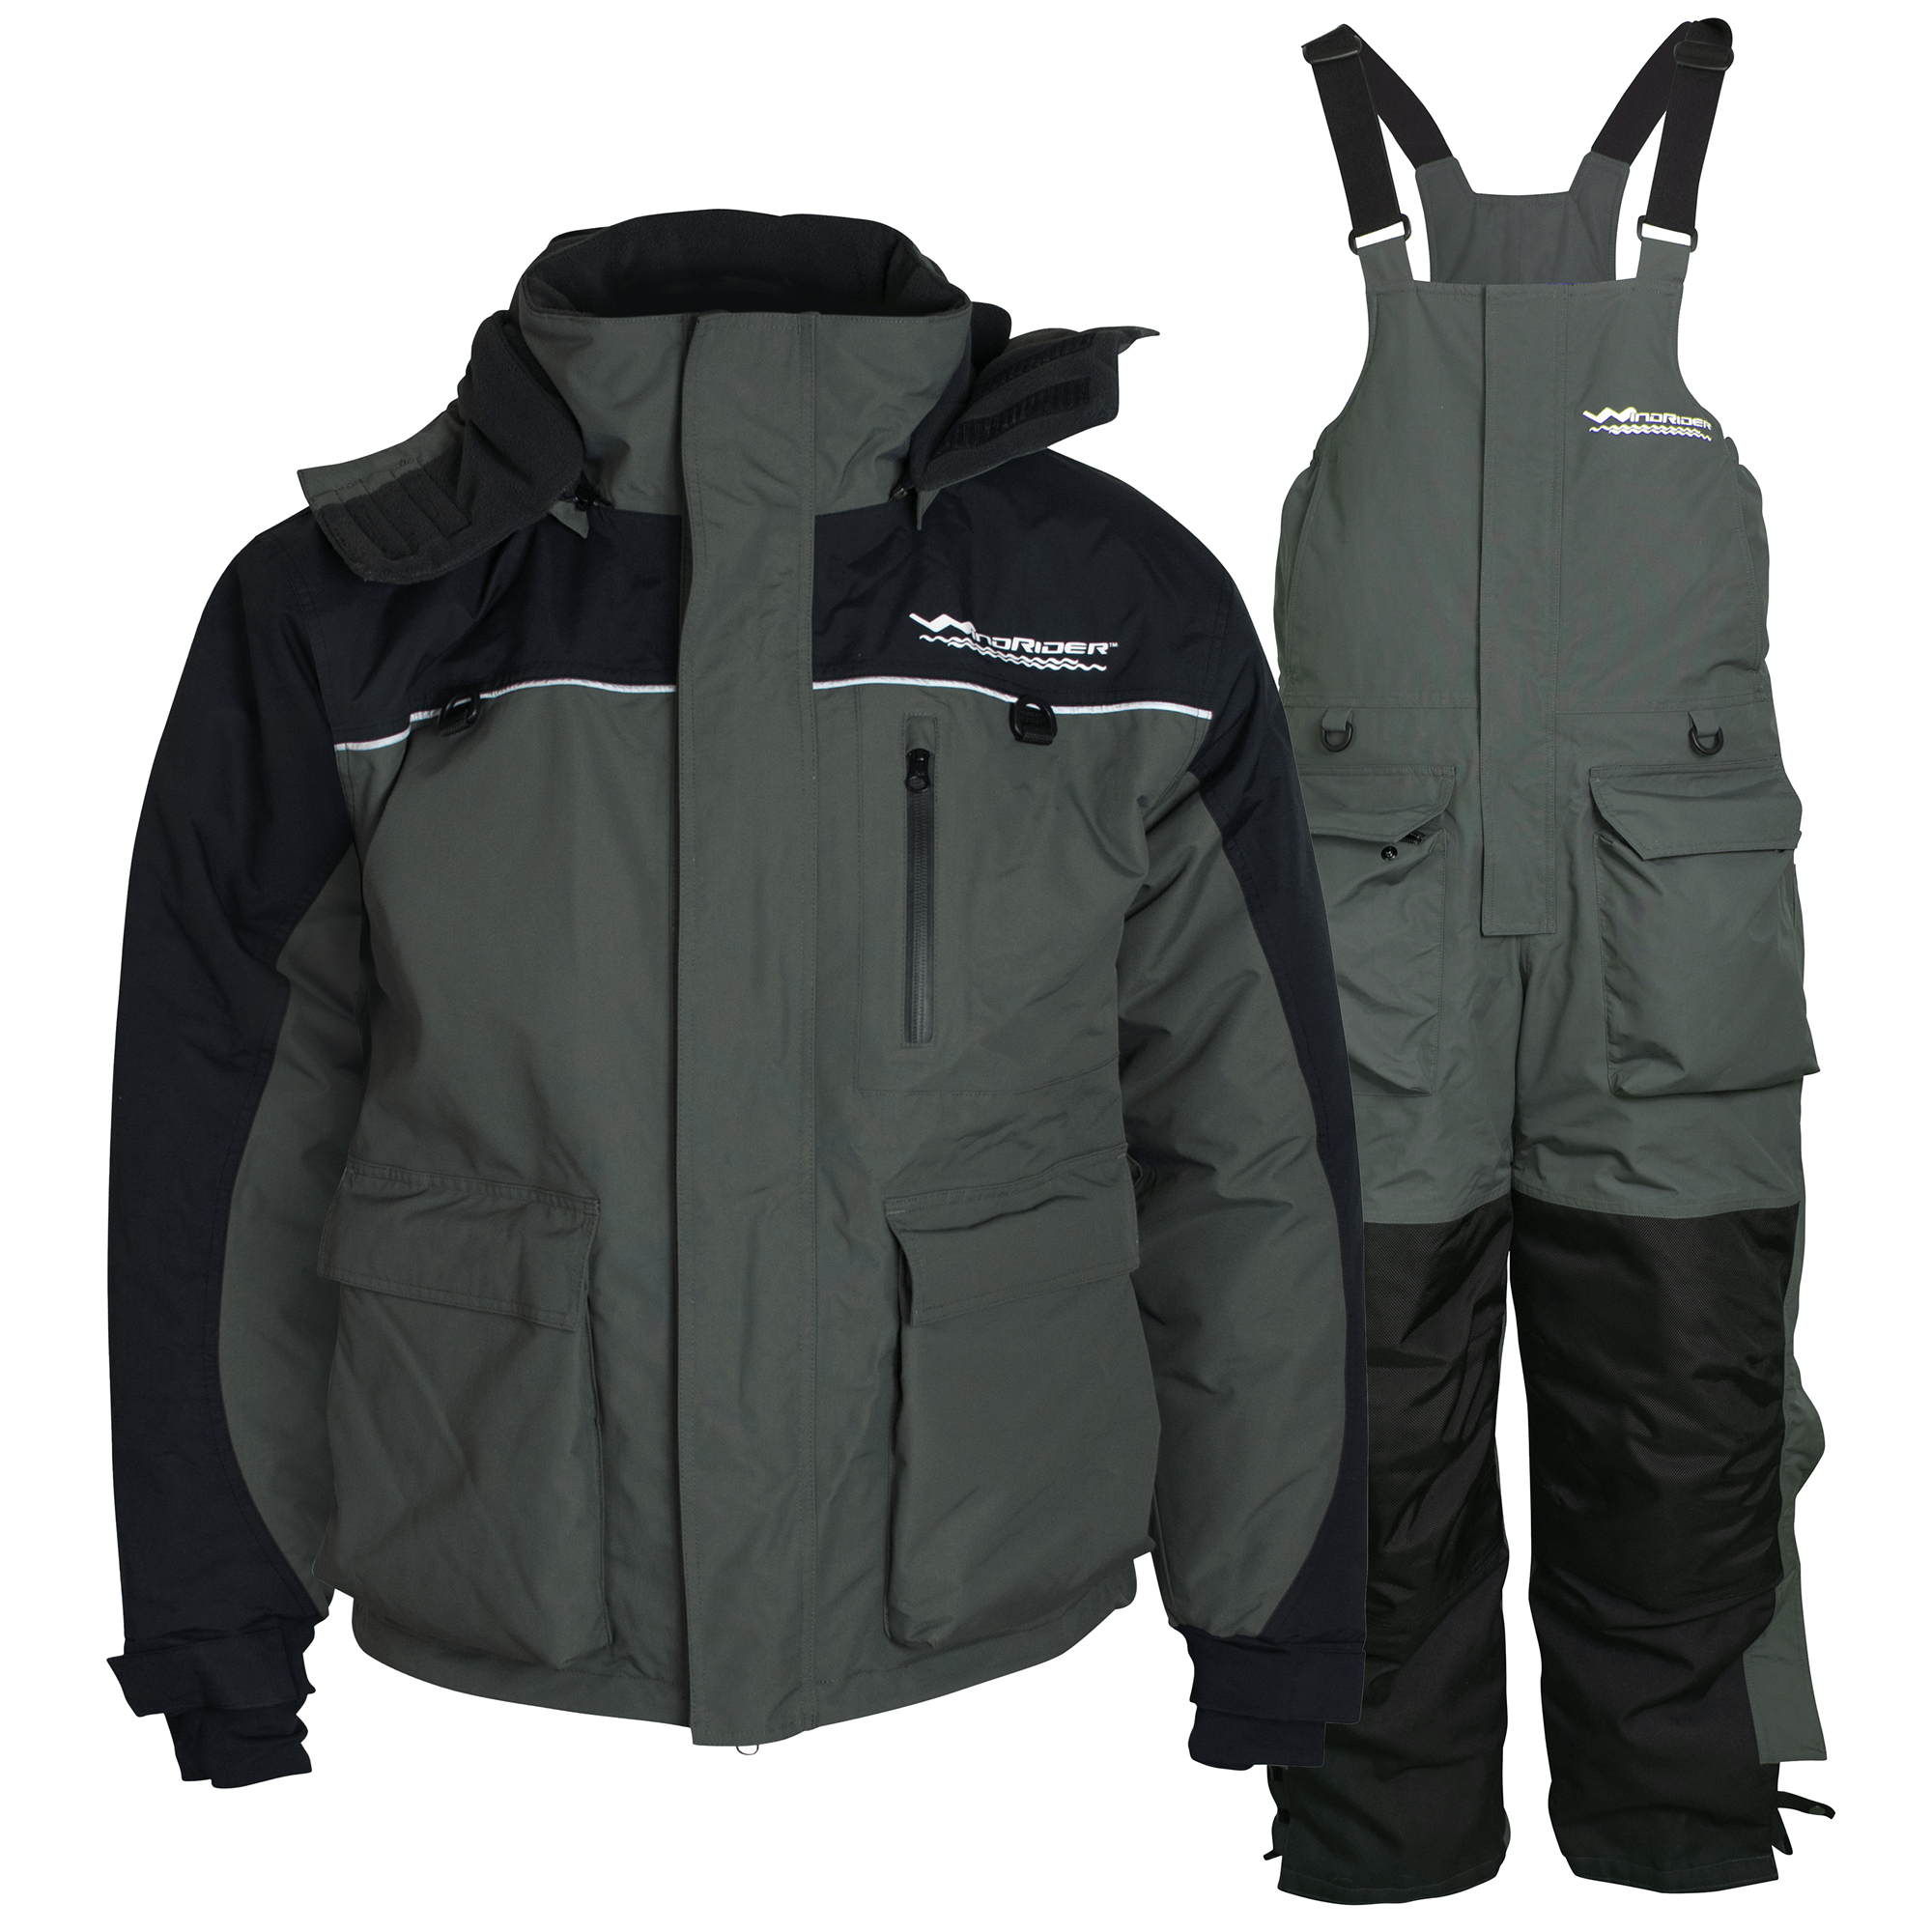 Wind hunter winter fishing suit down jumpsuit thick warm cotton clothing  waterproof cold suit ice fishing anchor fis…